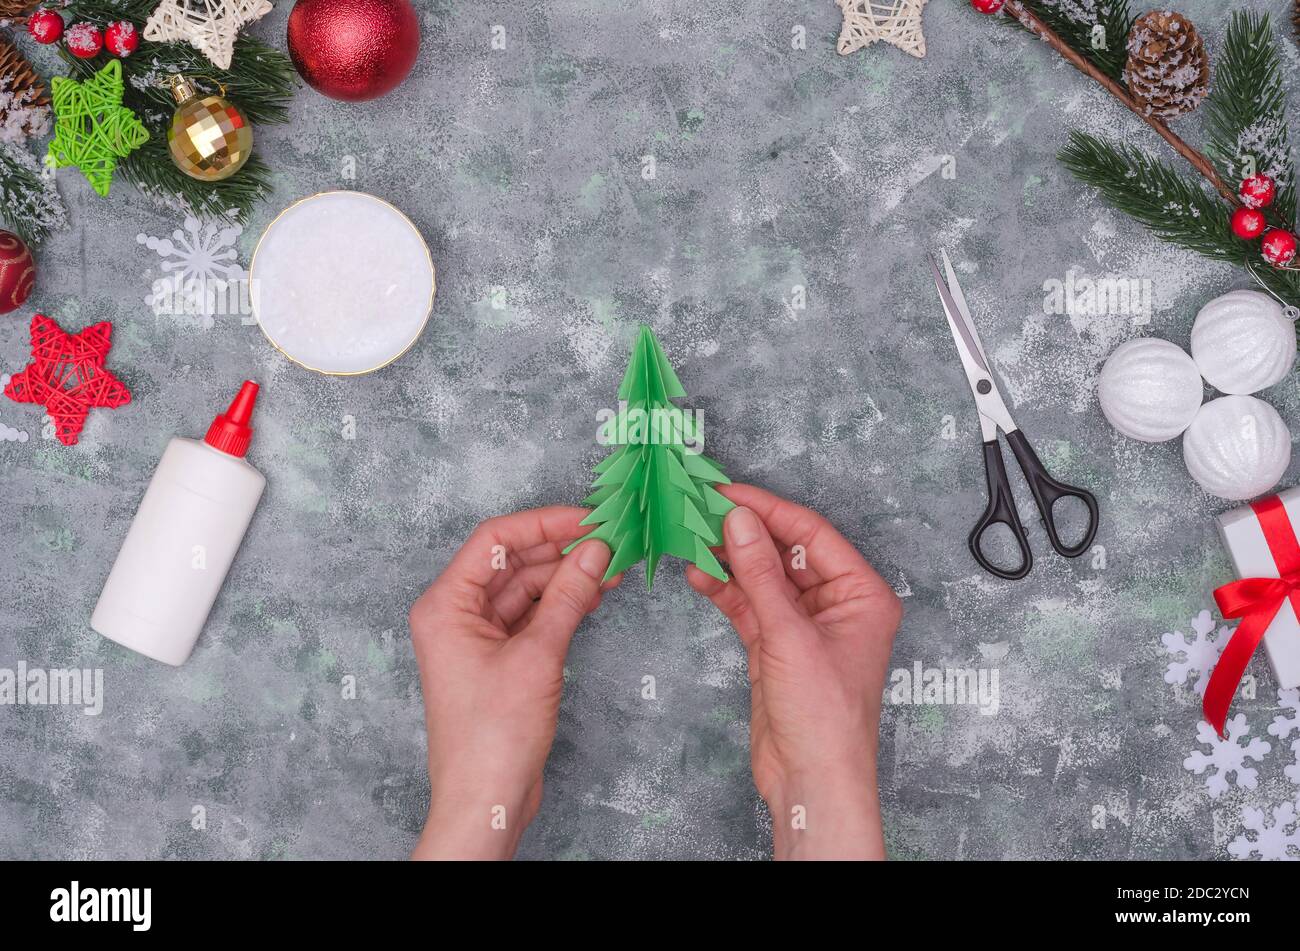 Christmas crafts - Christmas tree made of colored paper, step by ...